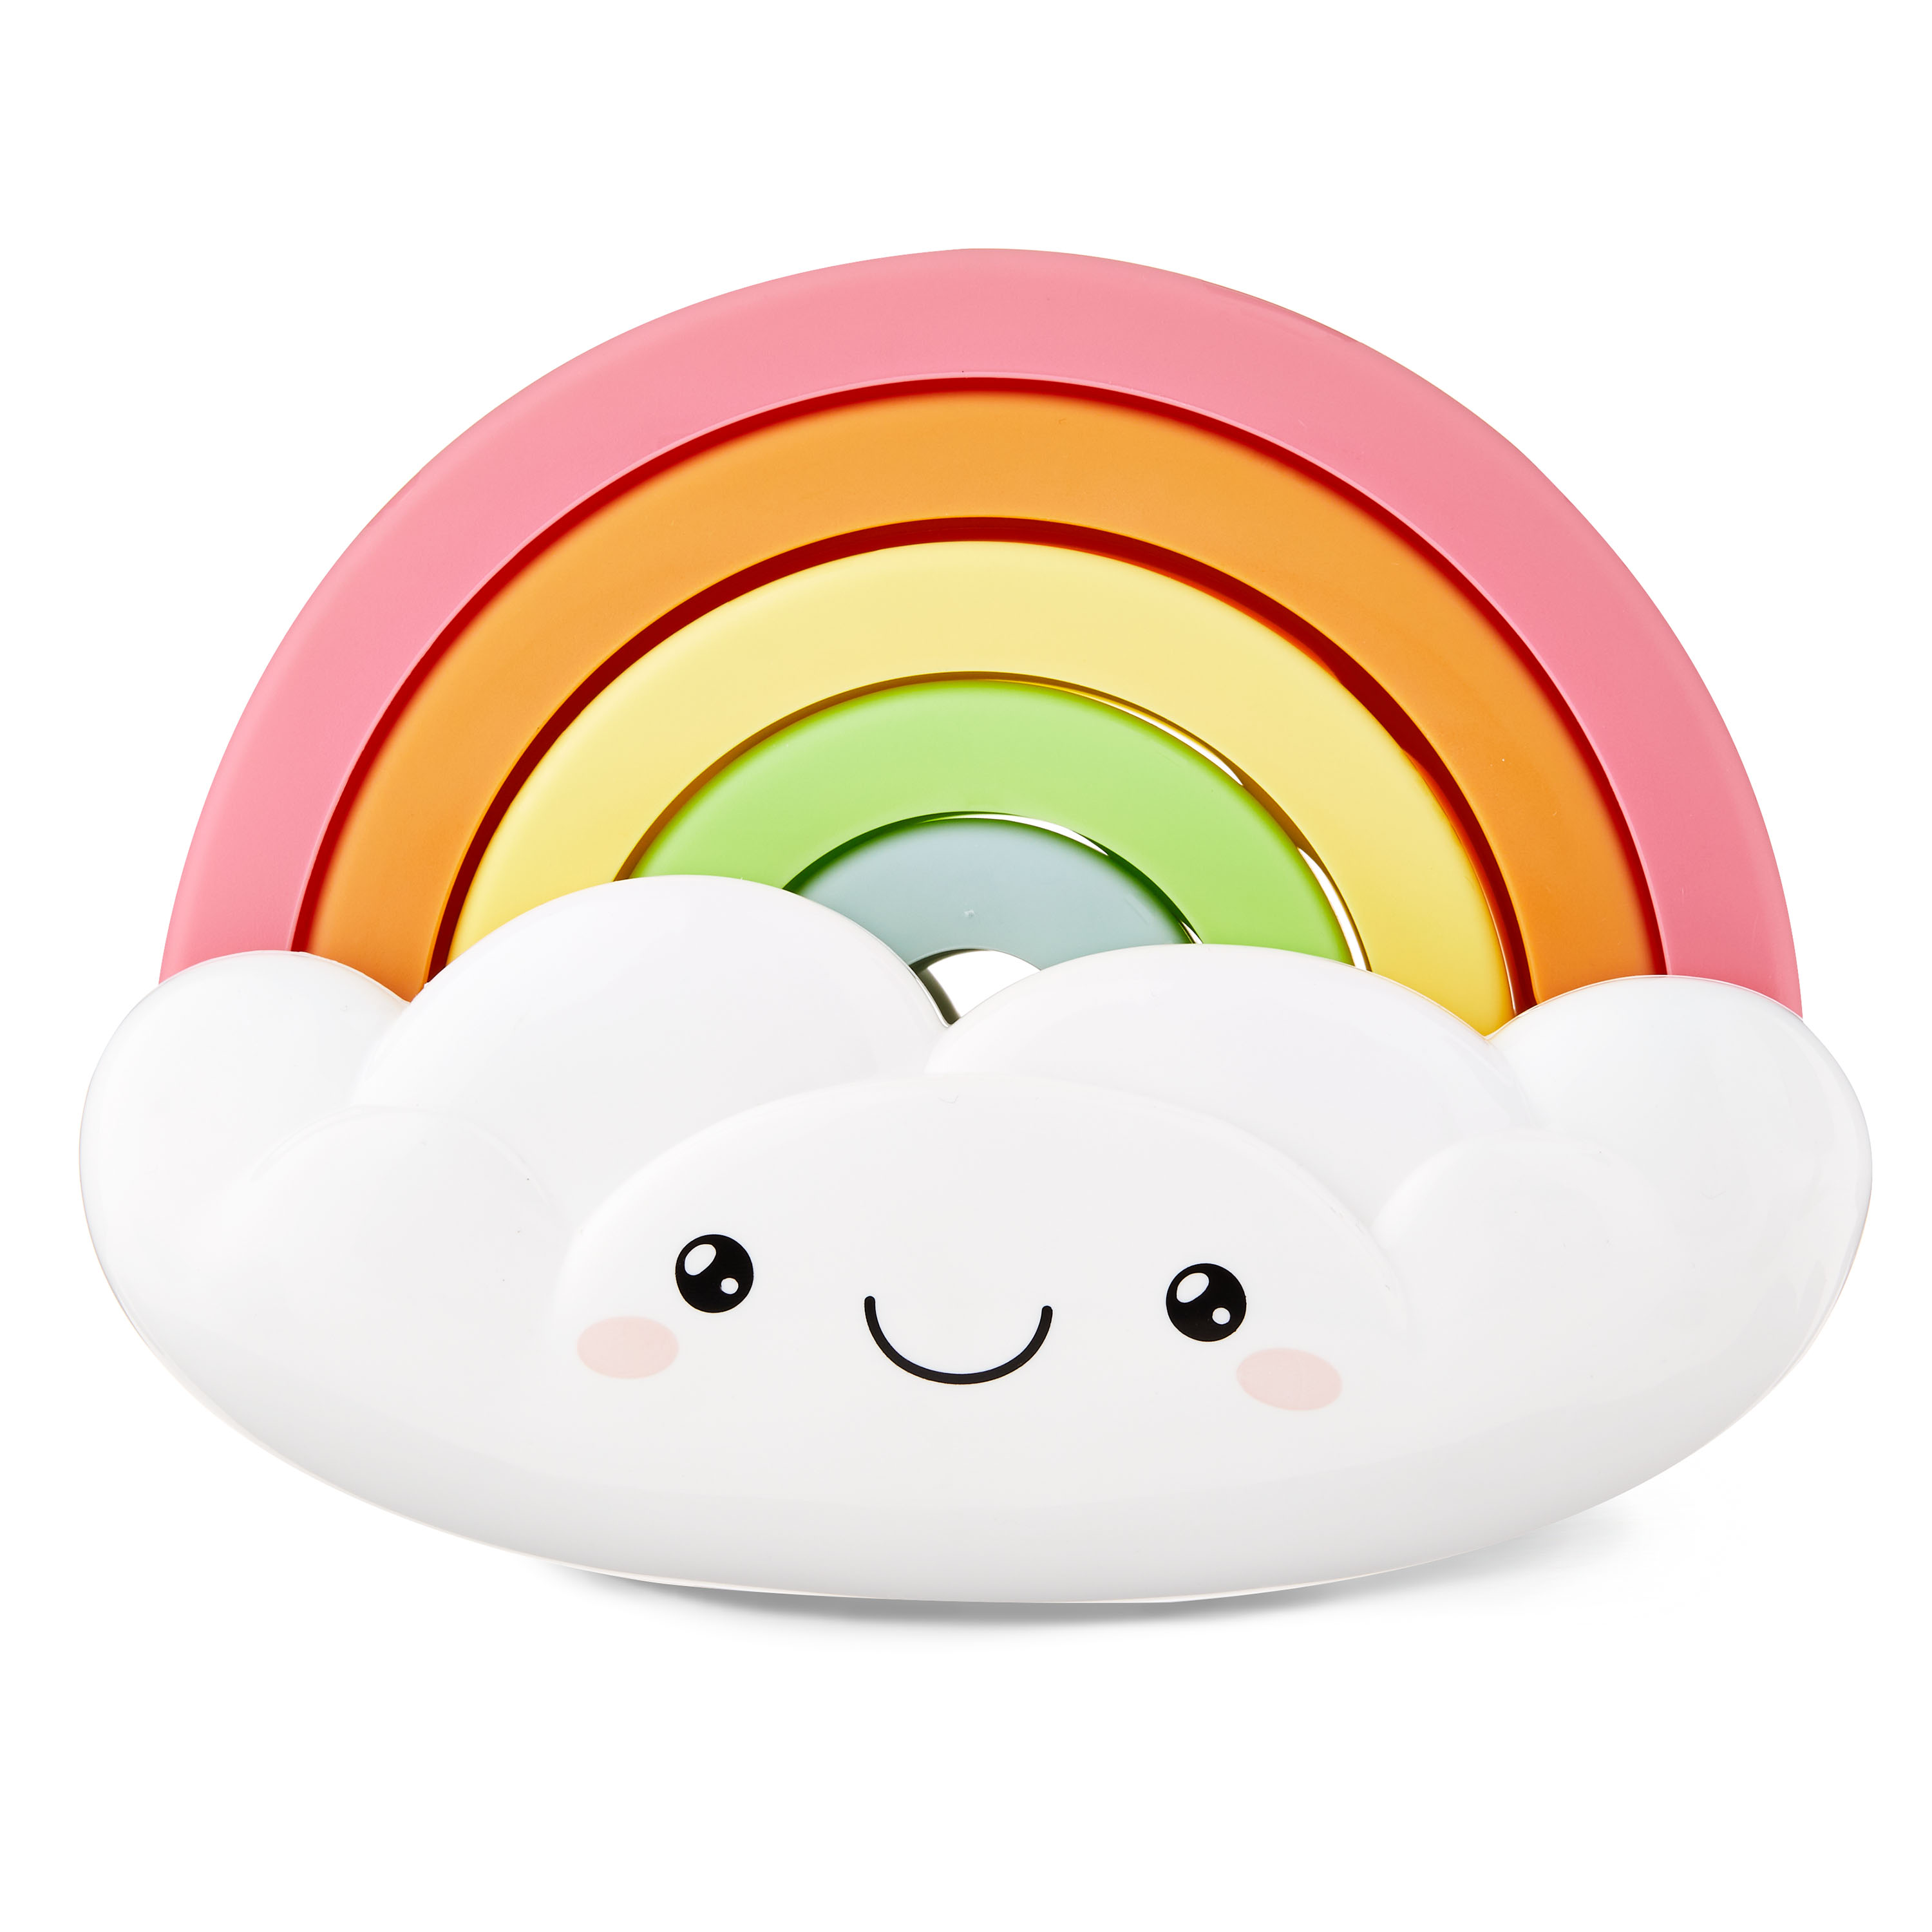 Spark Create Imagine 6-Piece Stacking Rainbow Cloud Toy, for Age Group 6m+, Plastic Toys - image 1 of 14